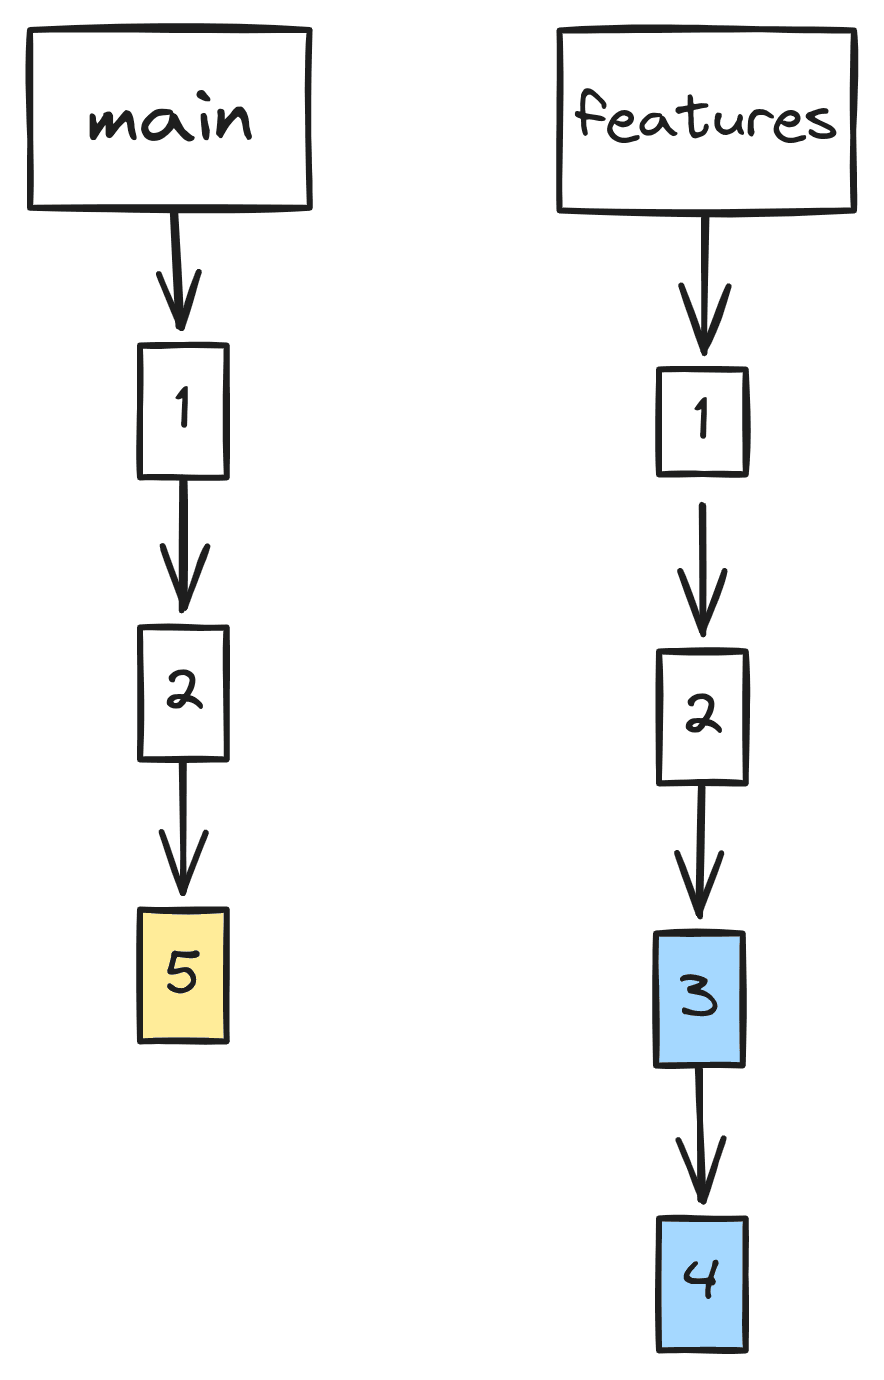 An image illustrating the status of the main and the feature branch before the rebase